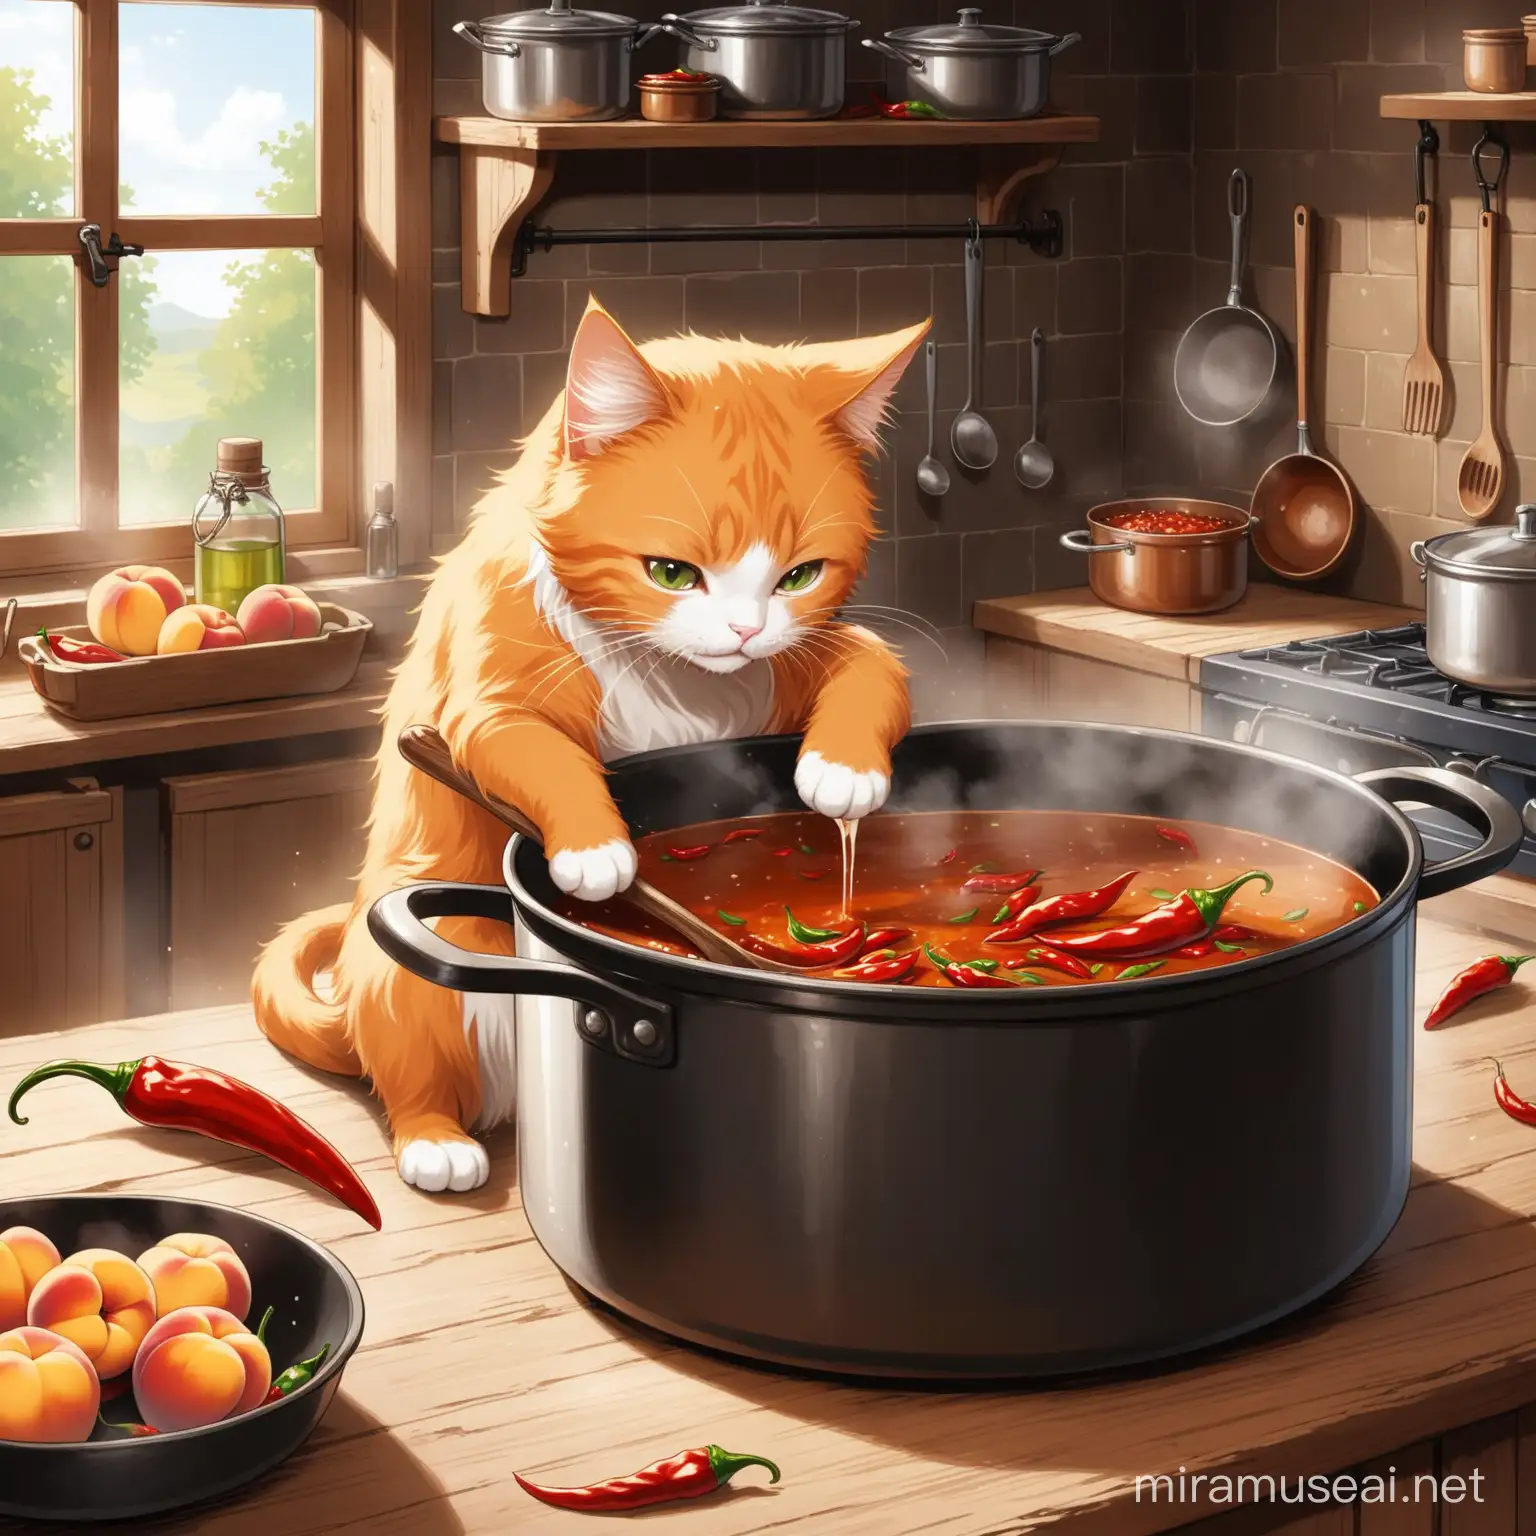 An orange cat in a rustic kitchen, stirring a large pot filled with chillis and peaches